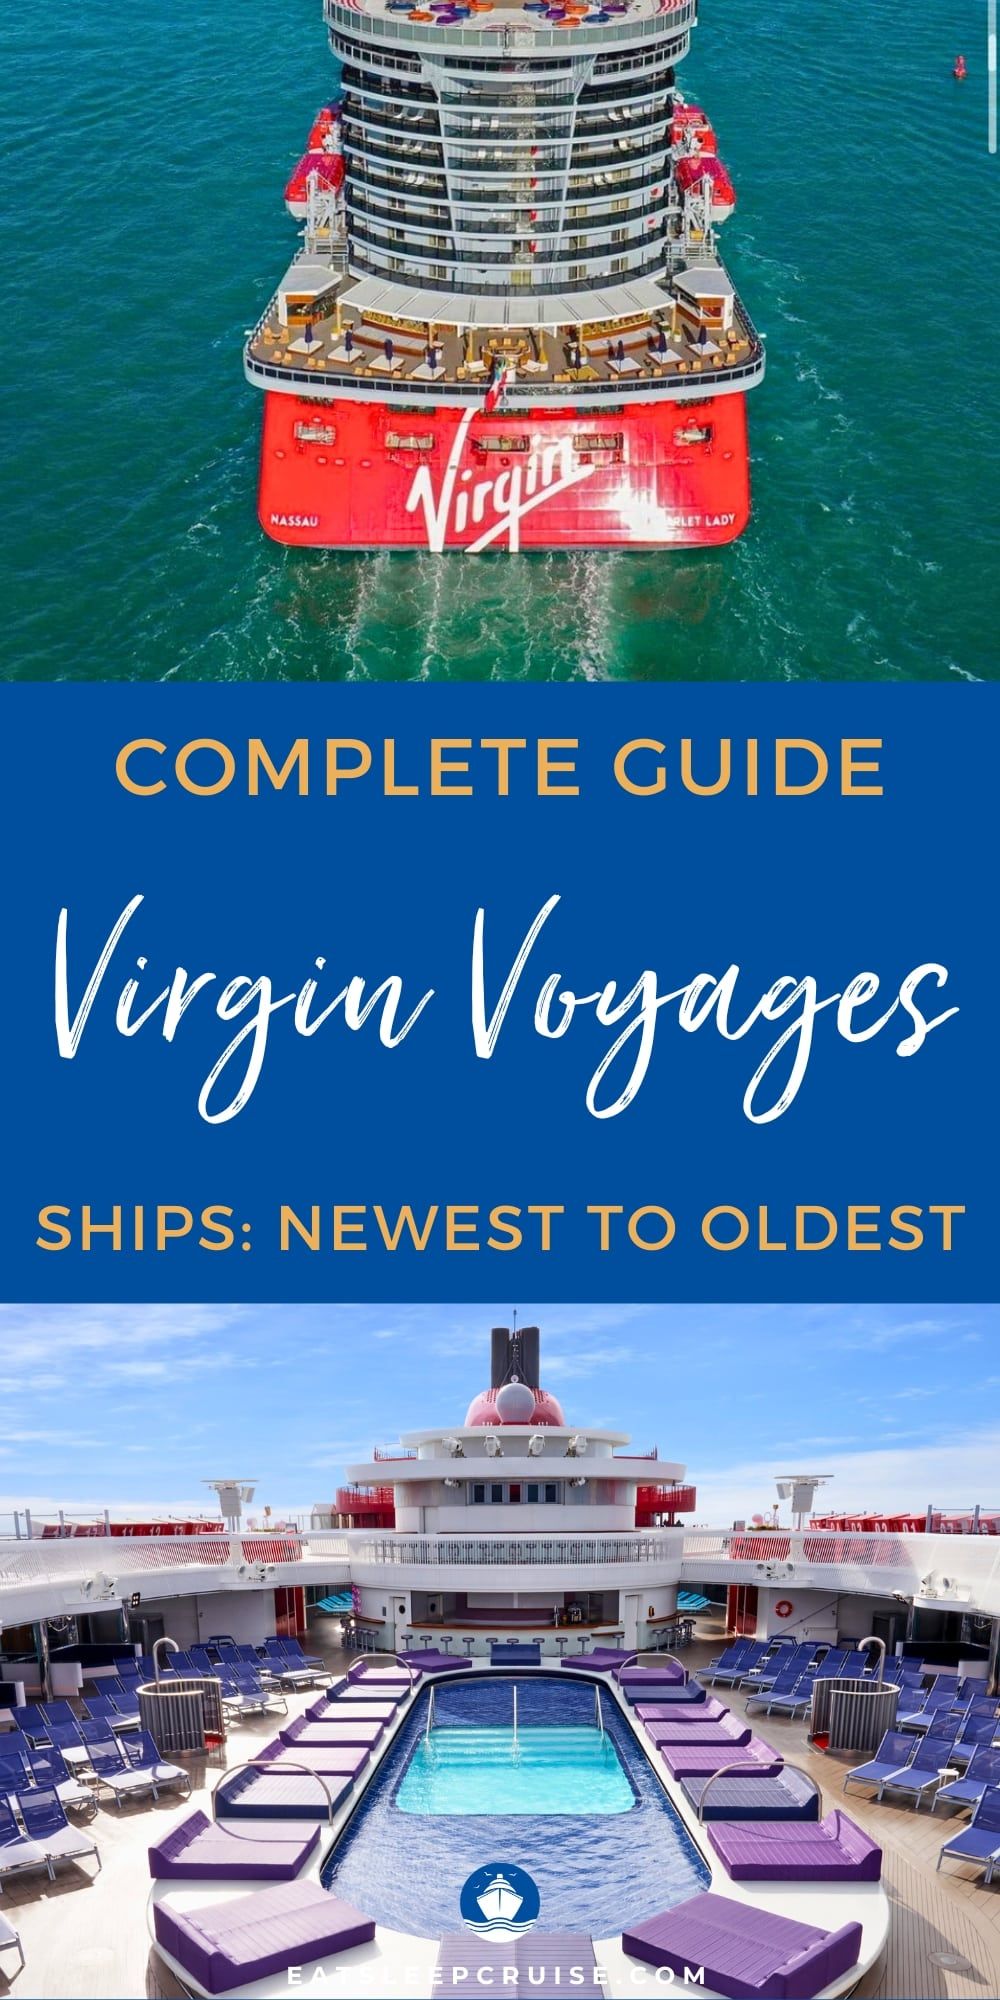 Complete Guide to Virgin Voyages Ships: Newest to Oldest